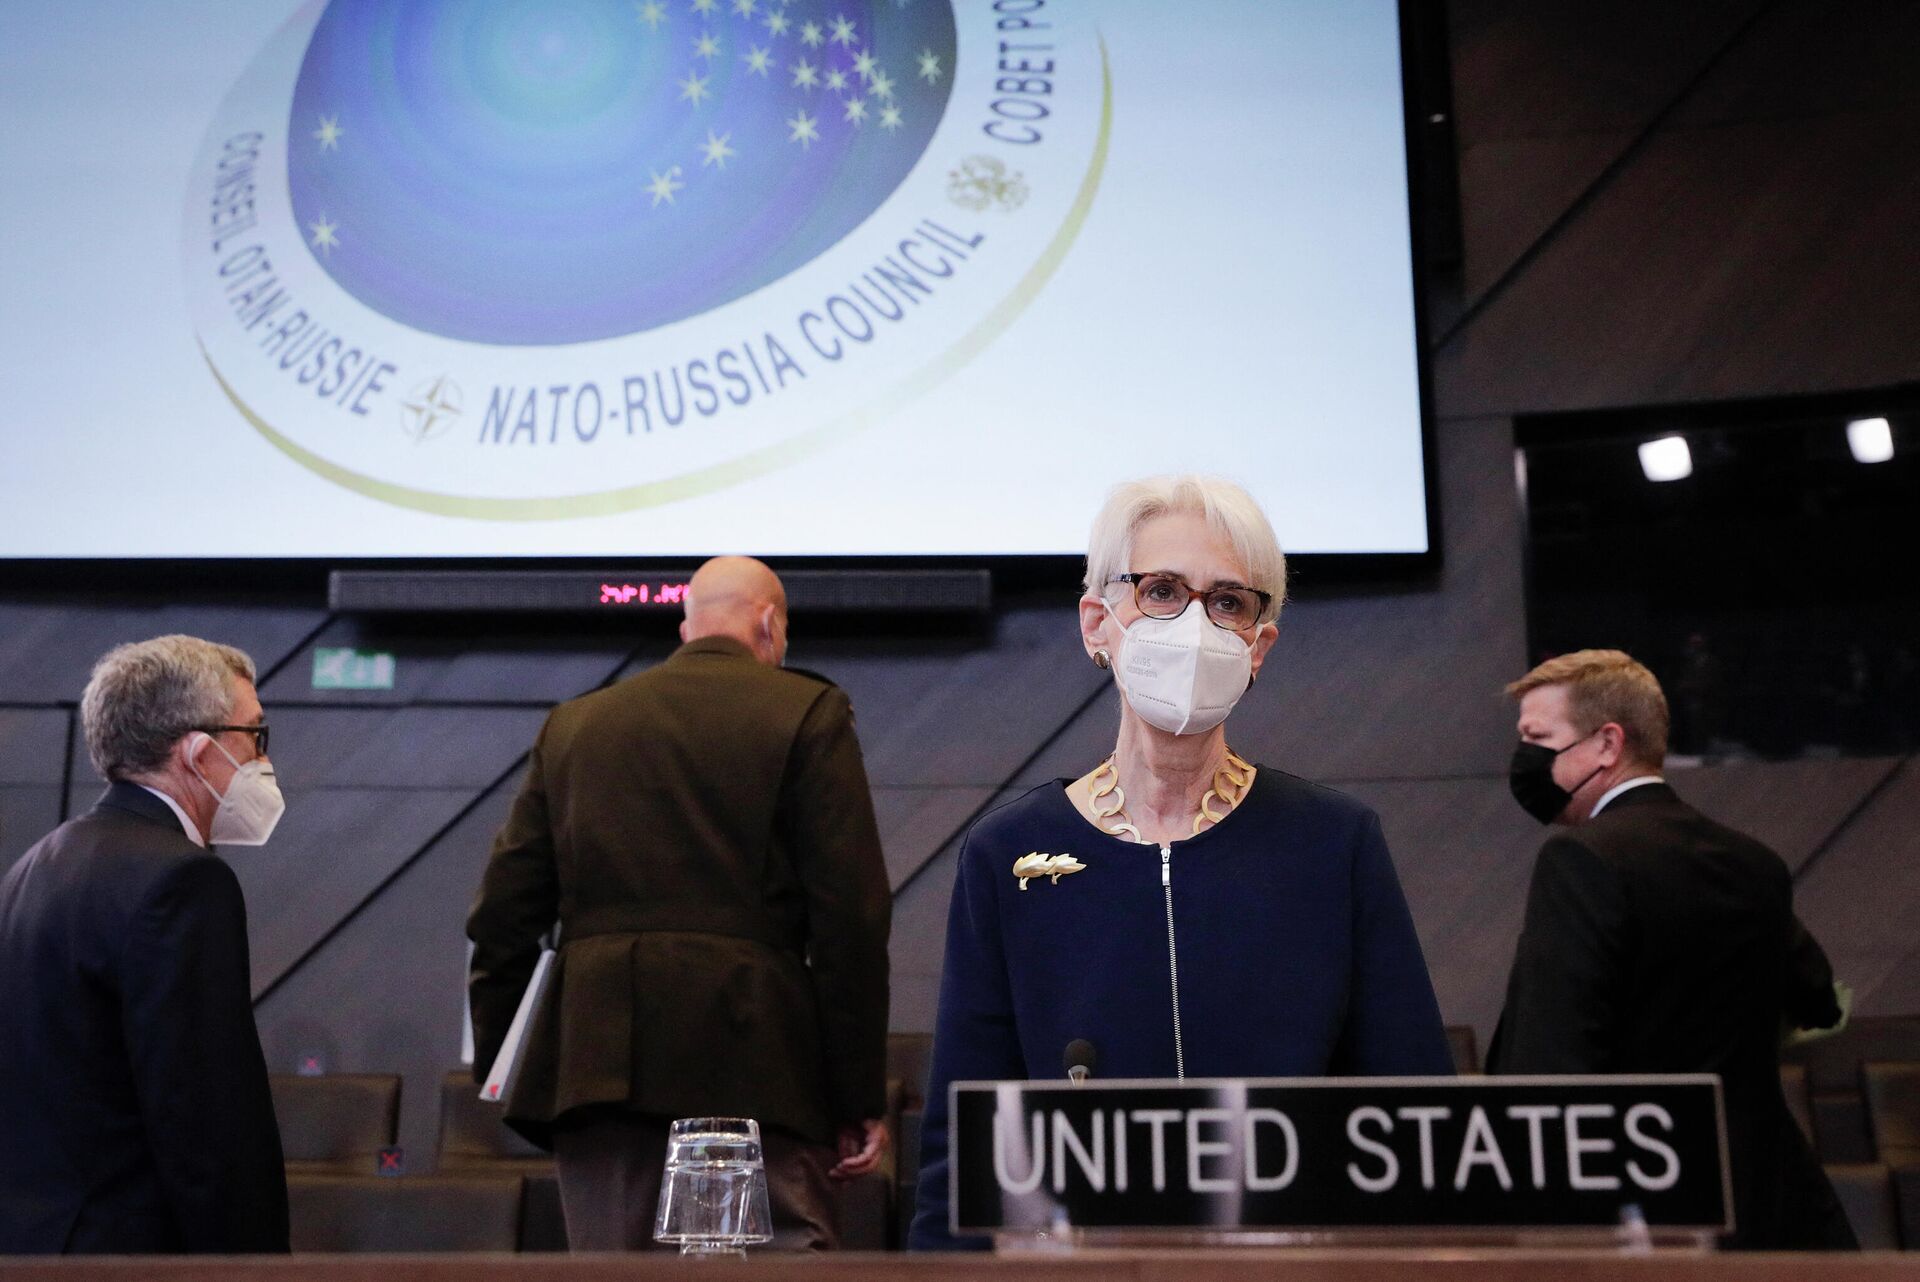 US Deputy Secretary of State Wendy Sherman attends the NATO-Russia Council at the Alliance's headquarters in Brussels, on January 12, 2022. - Sputnik International, 1920, 15.03.2022